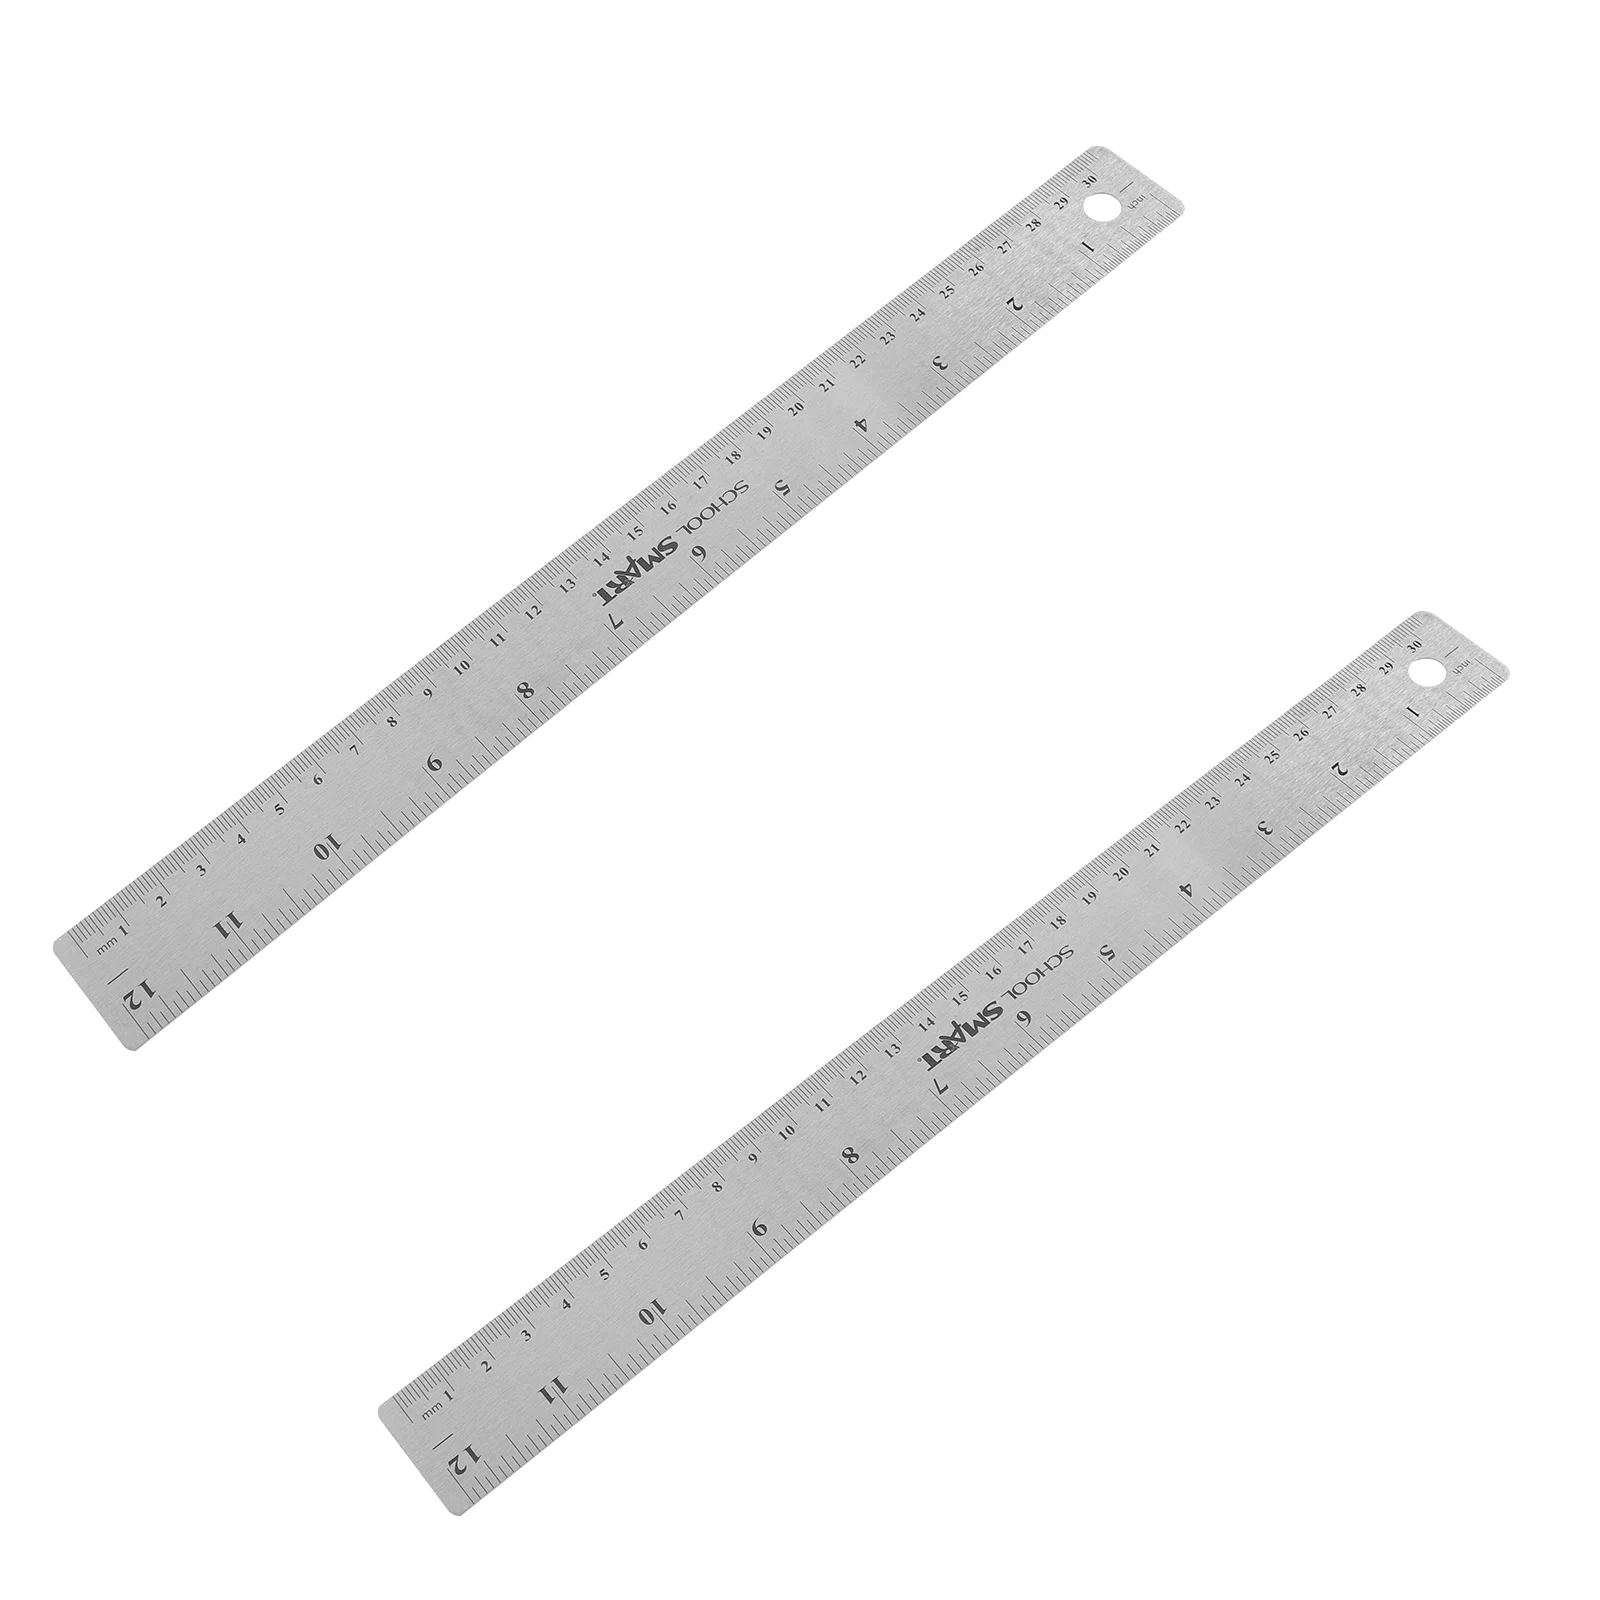 

2 Pcs Cork Stainless Steel Ruler Corked Rulers Engineering Machinist Scale Straight Edges Wooden Back Student Carpenters Tools